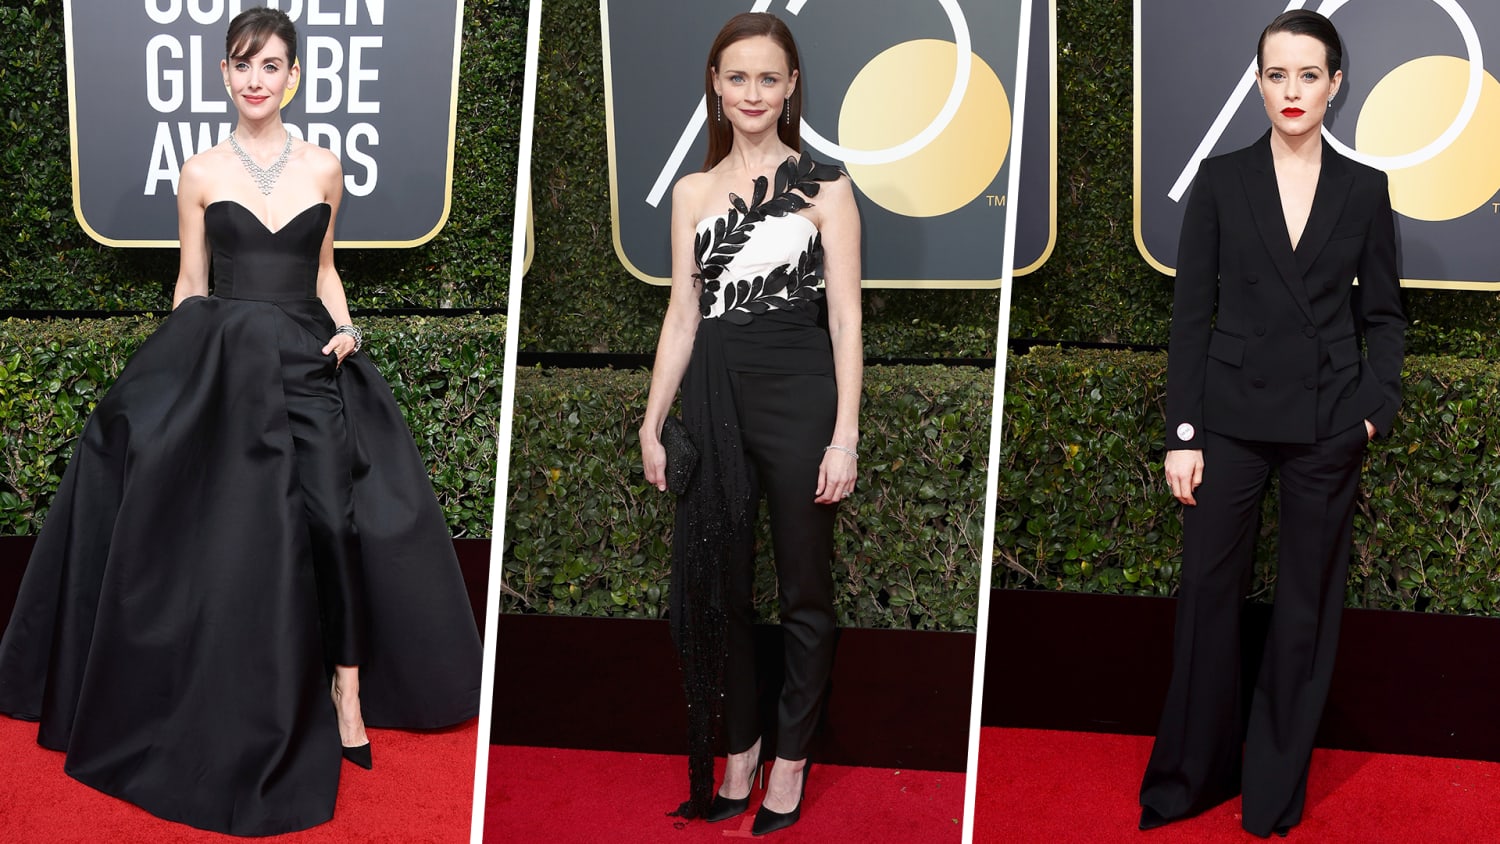 hårdtarbejdende stak interview Suits, tuxes and more: Women 'wear the pants' at the Golden Globes